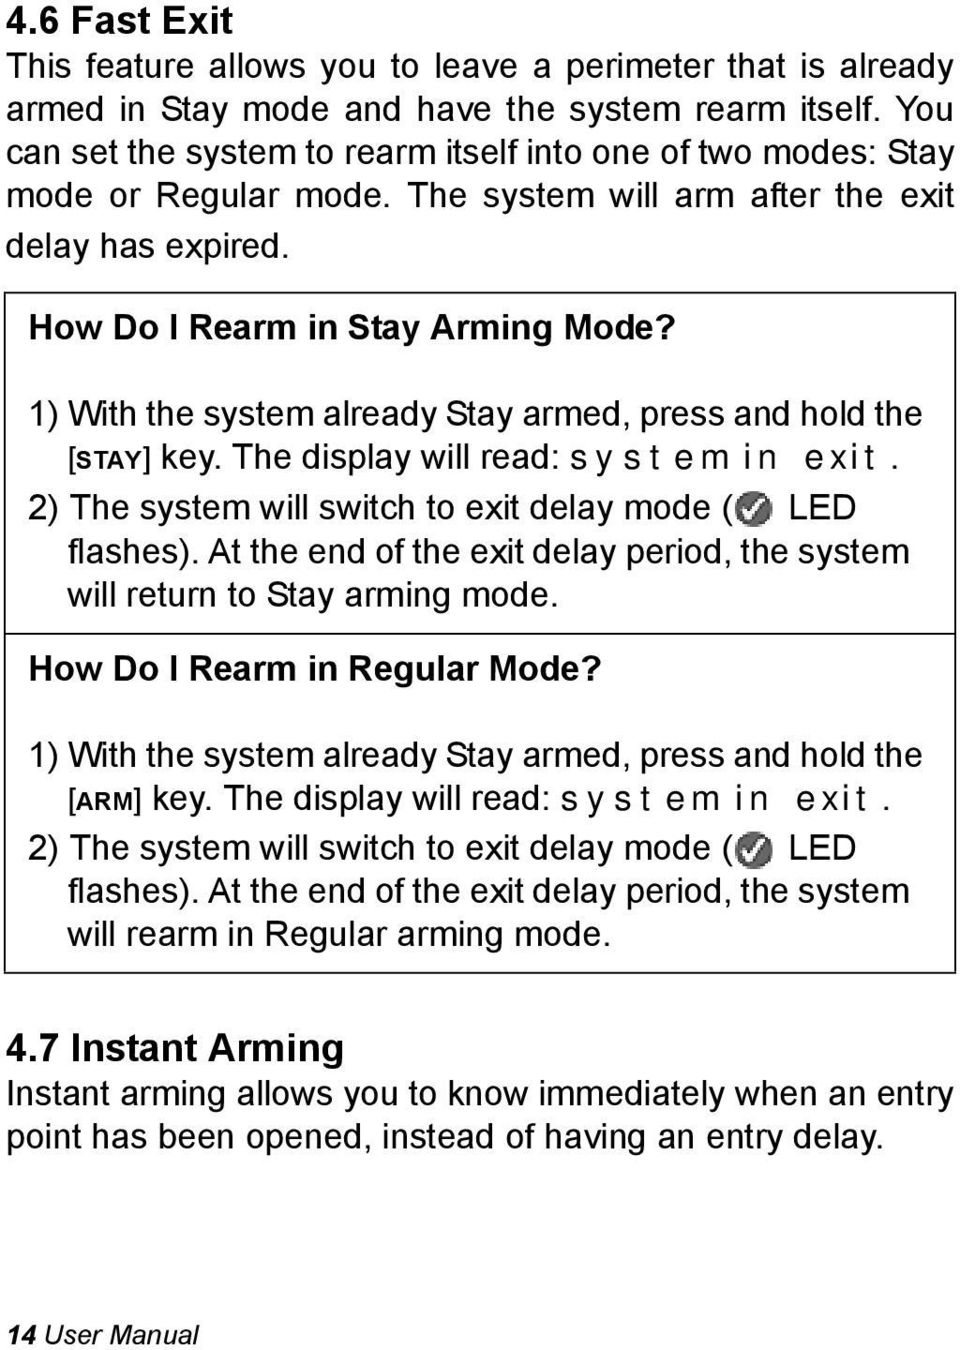 1) With the system already Stay armed, press and hold the [STAY] key. The display will read: system in exit. 2) The system will switch to exit delay mode ( LED flashes).